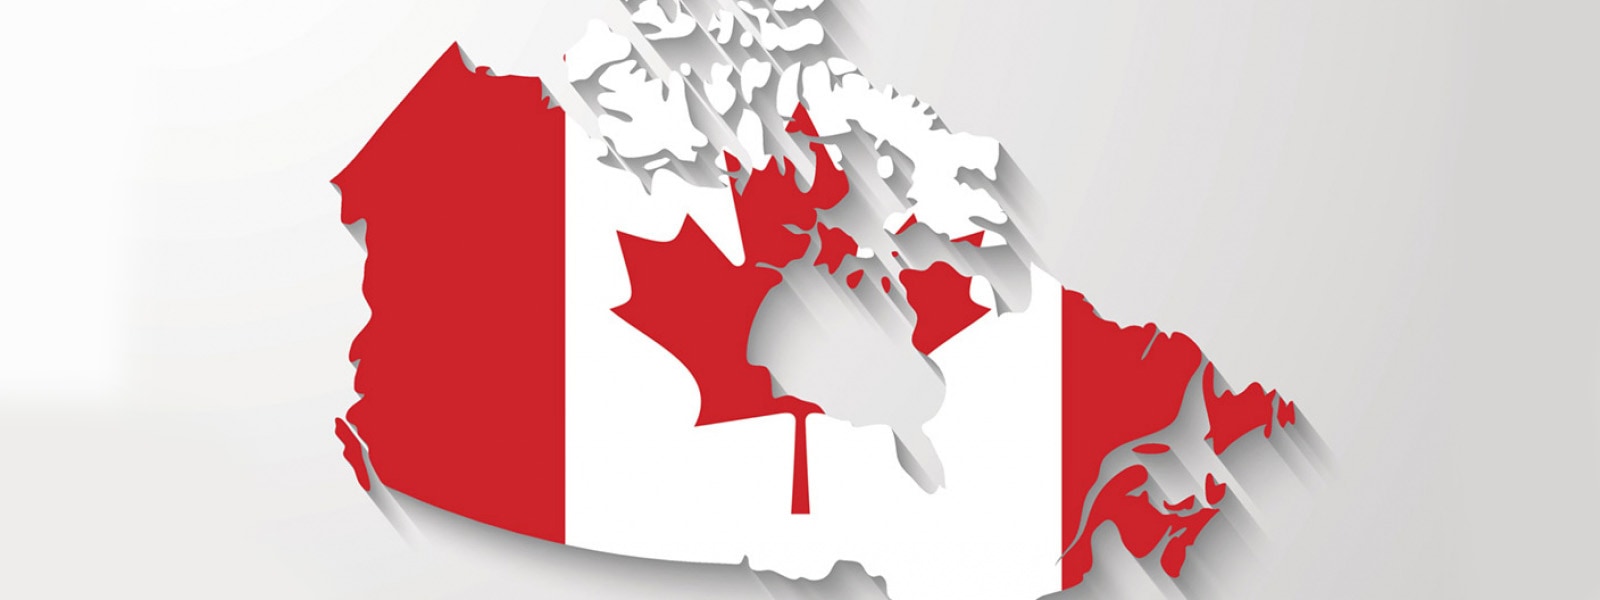 Web design jobs in Canada by province